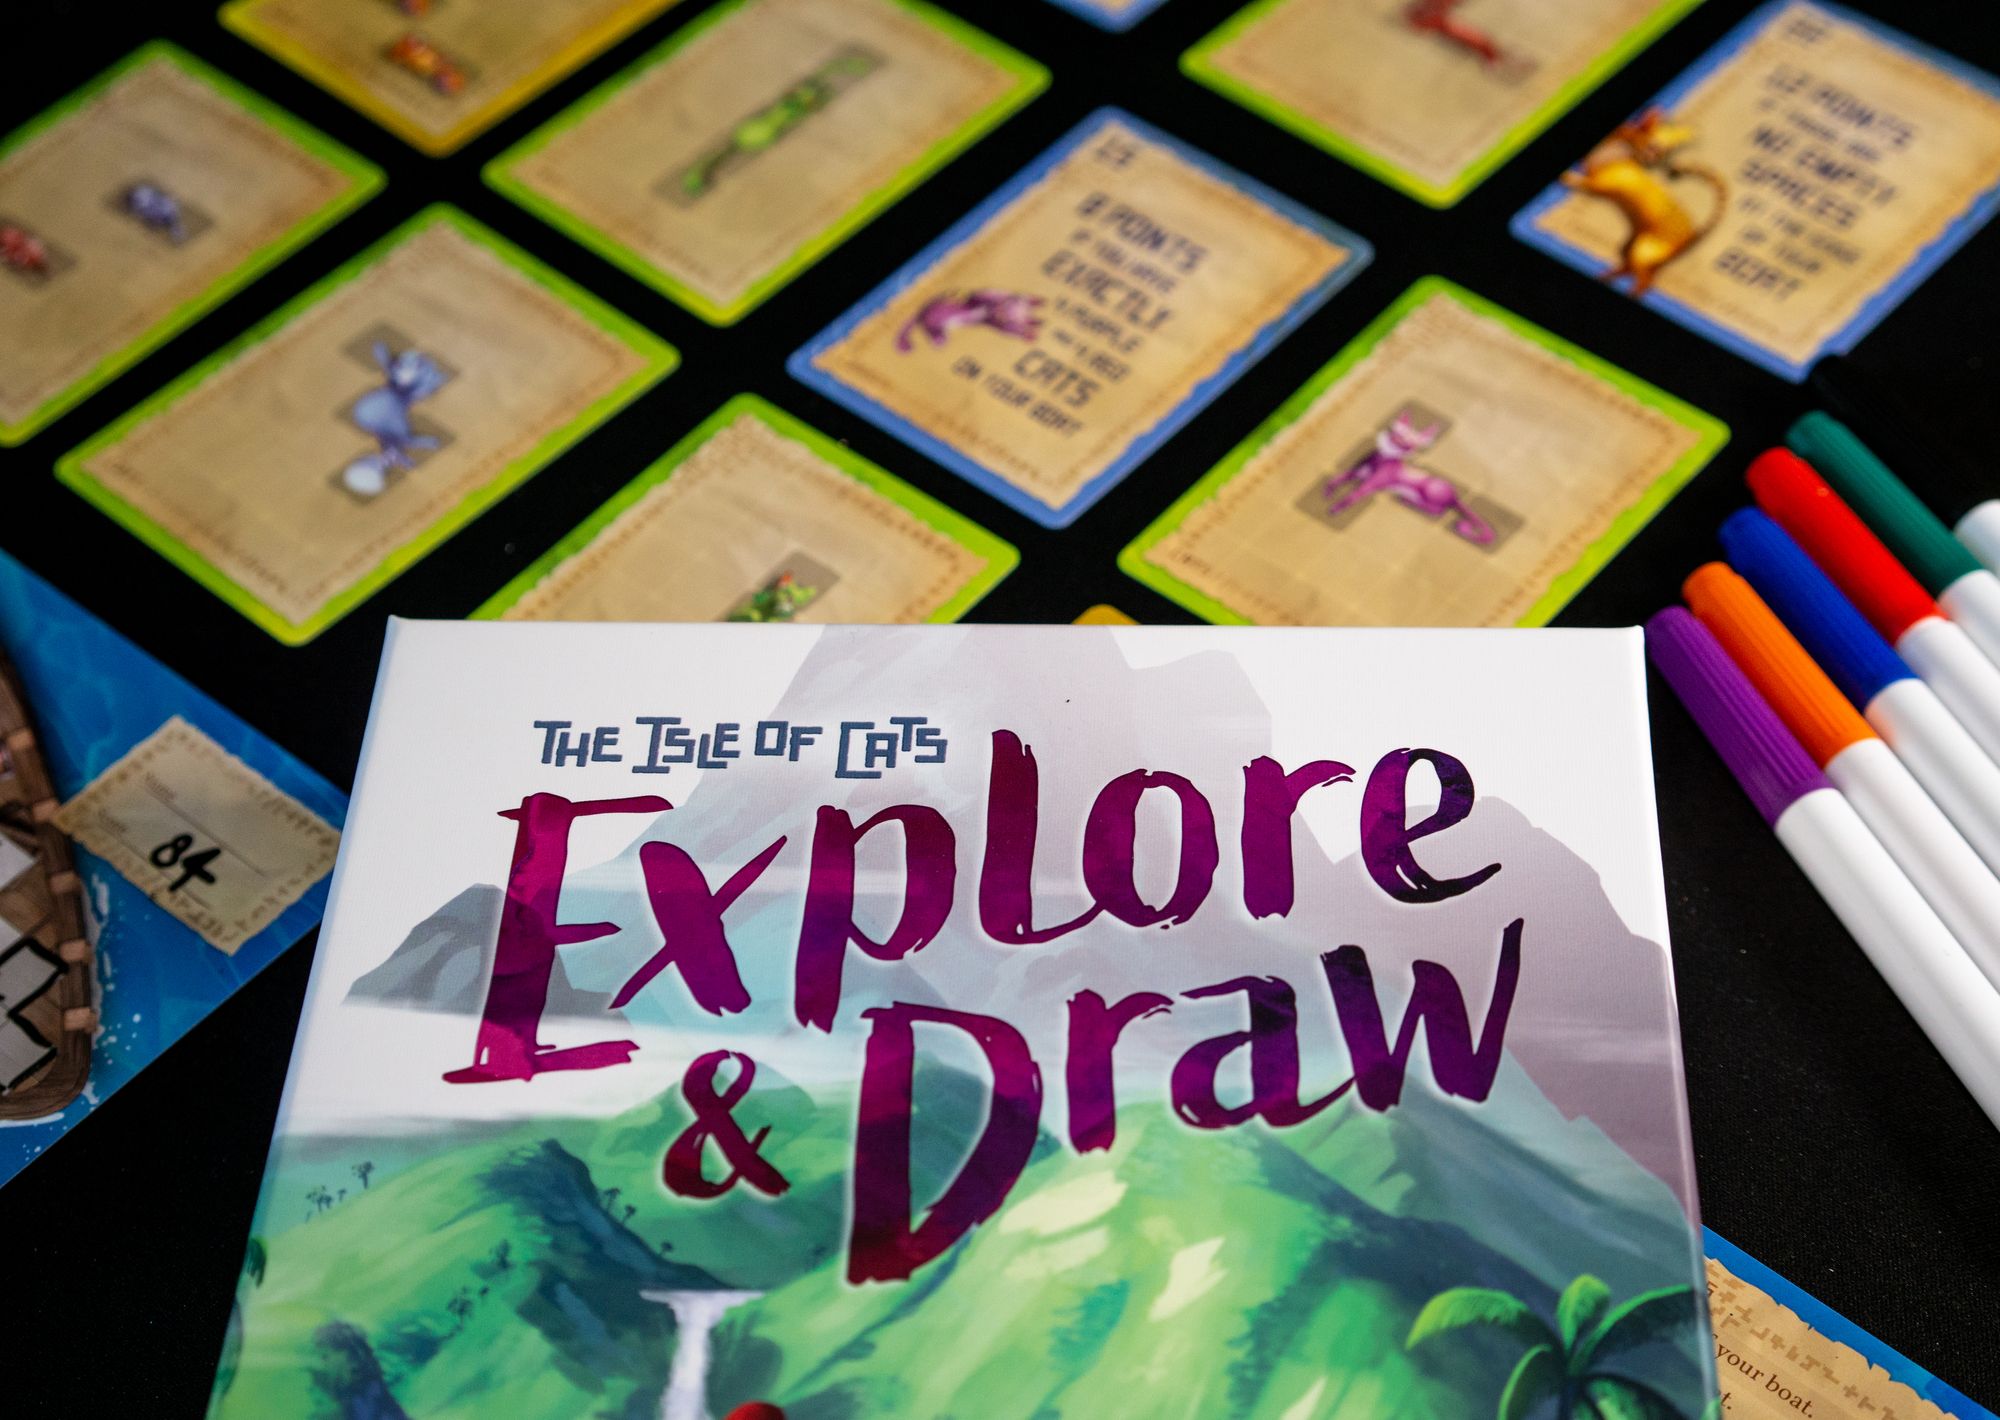 Review: The Isle of Cats: Explore & Draw